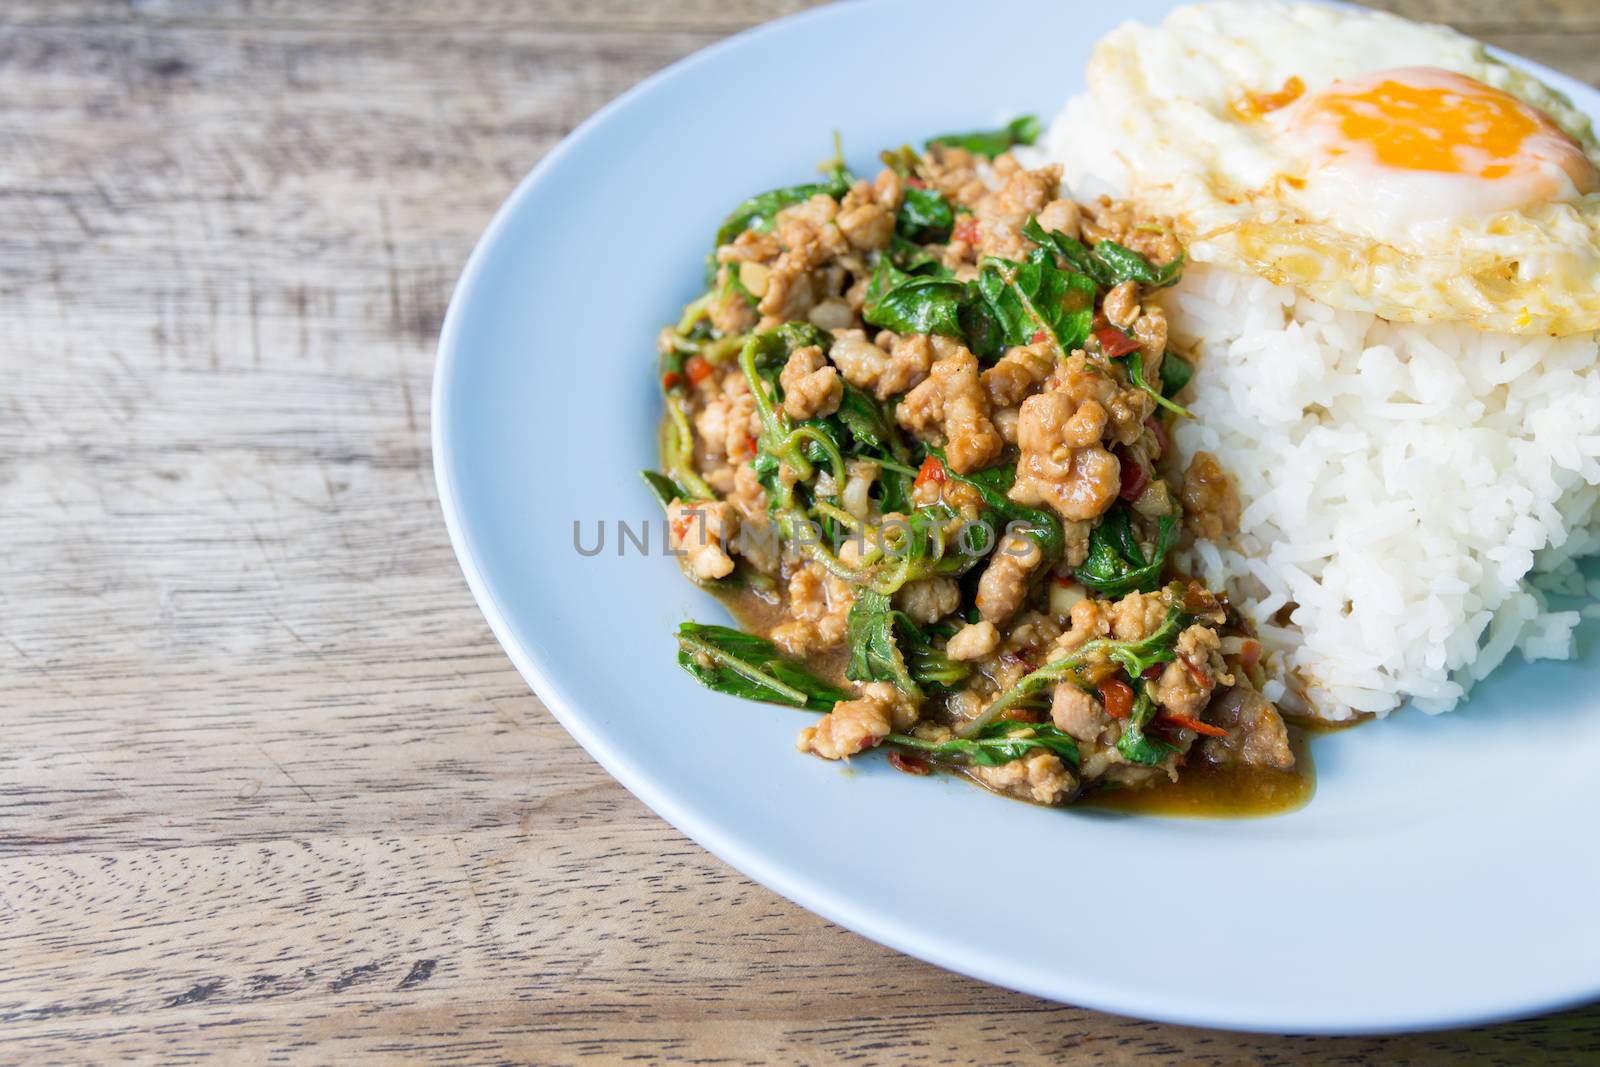 Stir-fried minced pork with holy basil and steamed rice  by vitawin